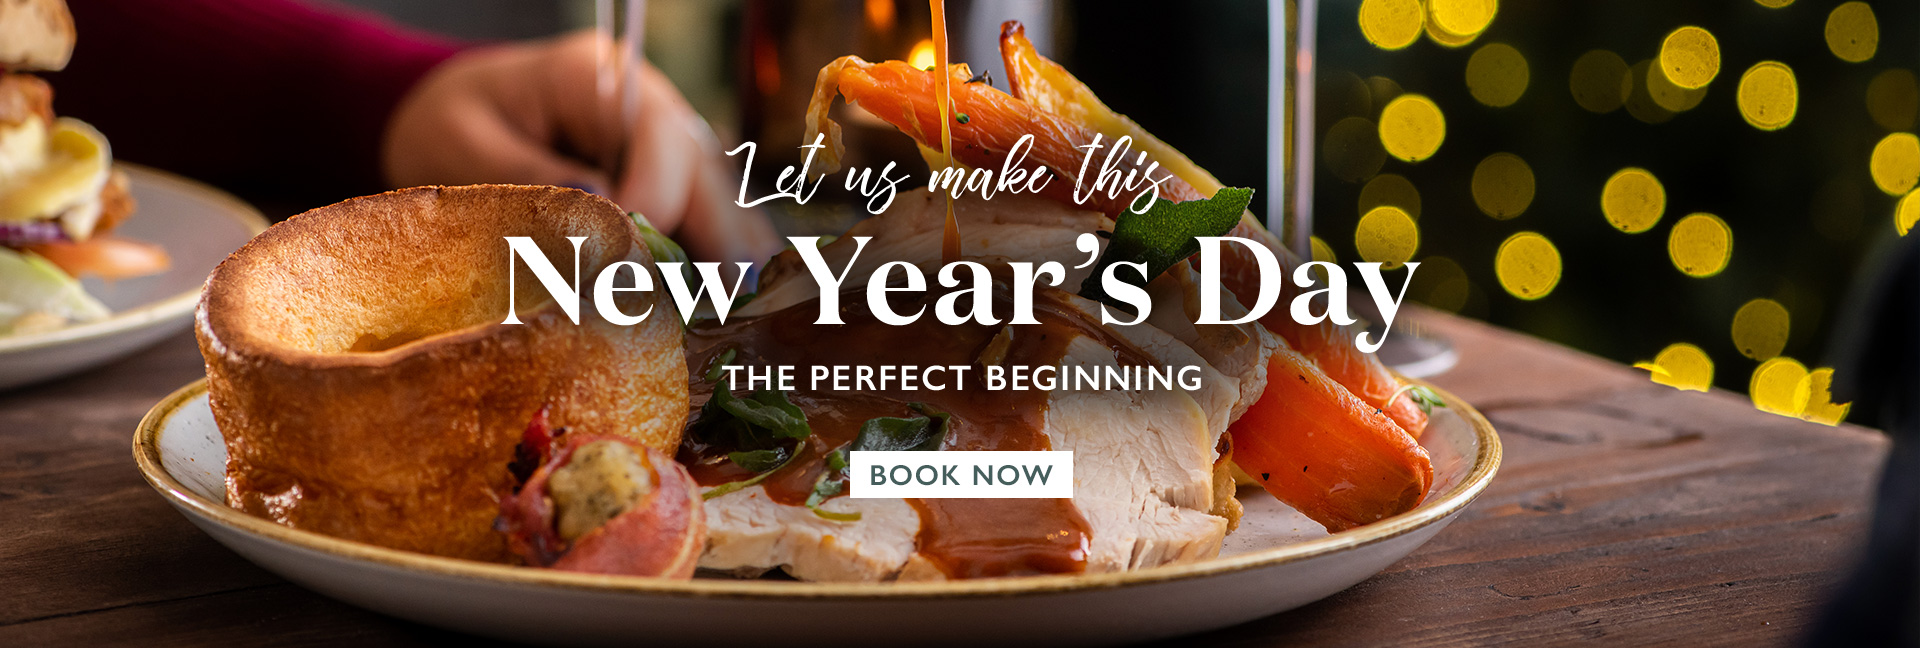 New Year’s Day Menu at The Robin Hood, Droitwich 